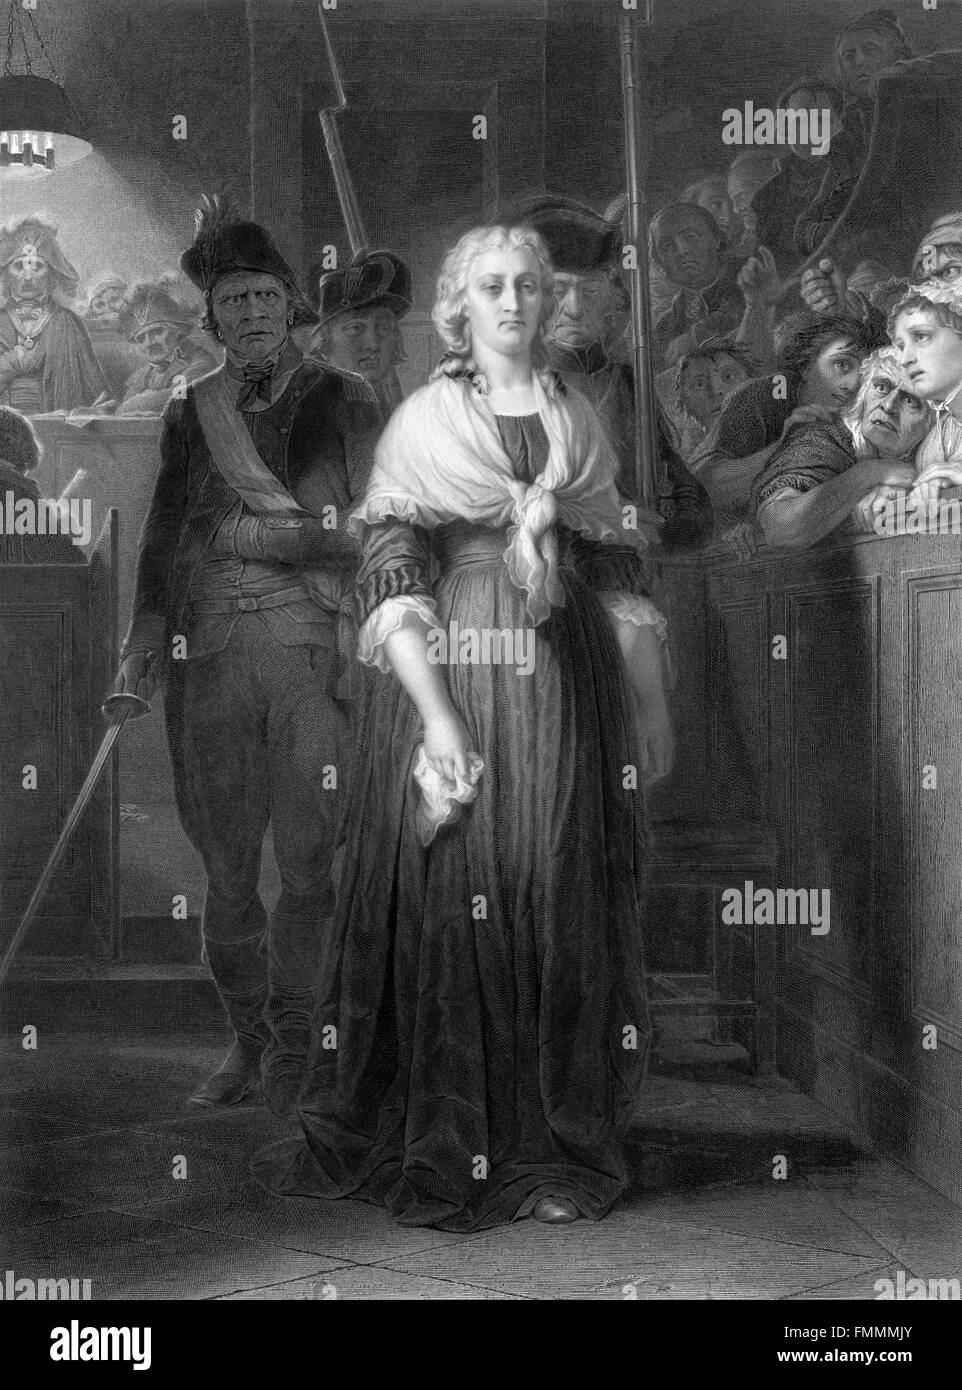 'Marie Antoinette au Tribunal Révolutionnaire', engraving by Alphonse François, from a painting by Paul Delaroche, 1857. The picture depicts Marie Antoinette, Queen of France and wife of King Louis XVI, at the revolutionary tribunal in October 1793 where she was condemned to death. Stock Photo